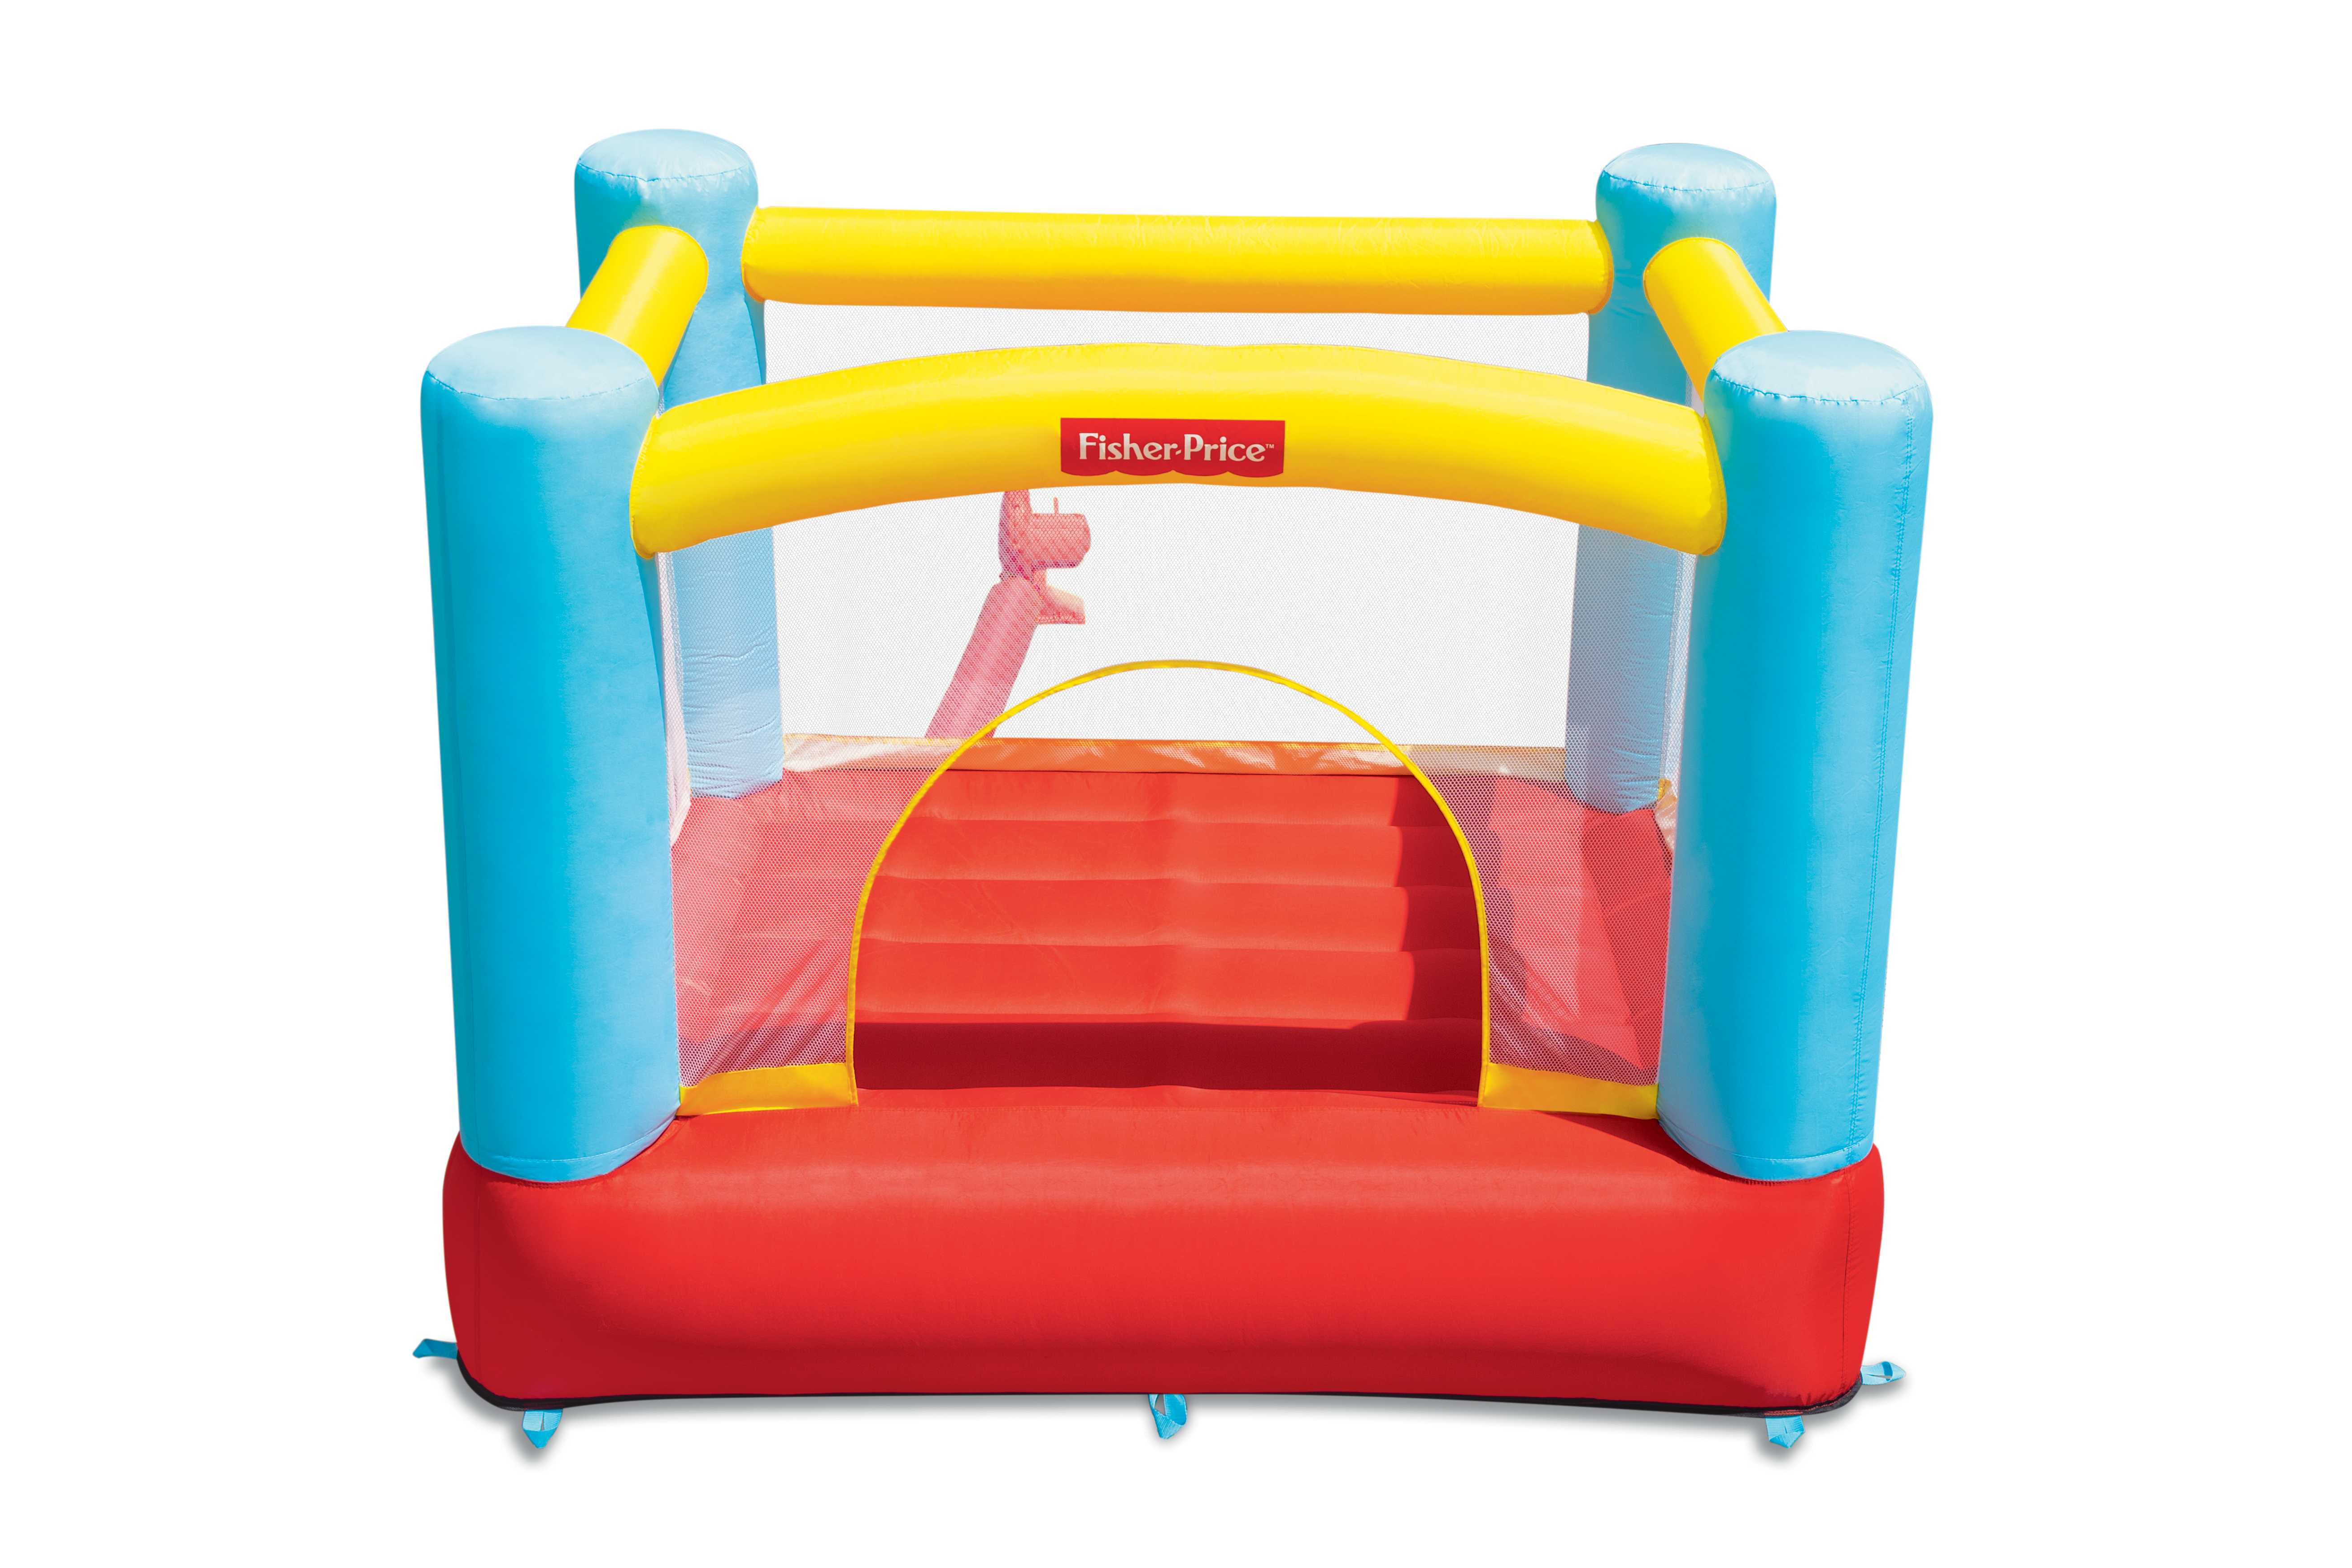 Fisher-Price Bouncetacular Bouncer with Included Blower - image 1 of 9